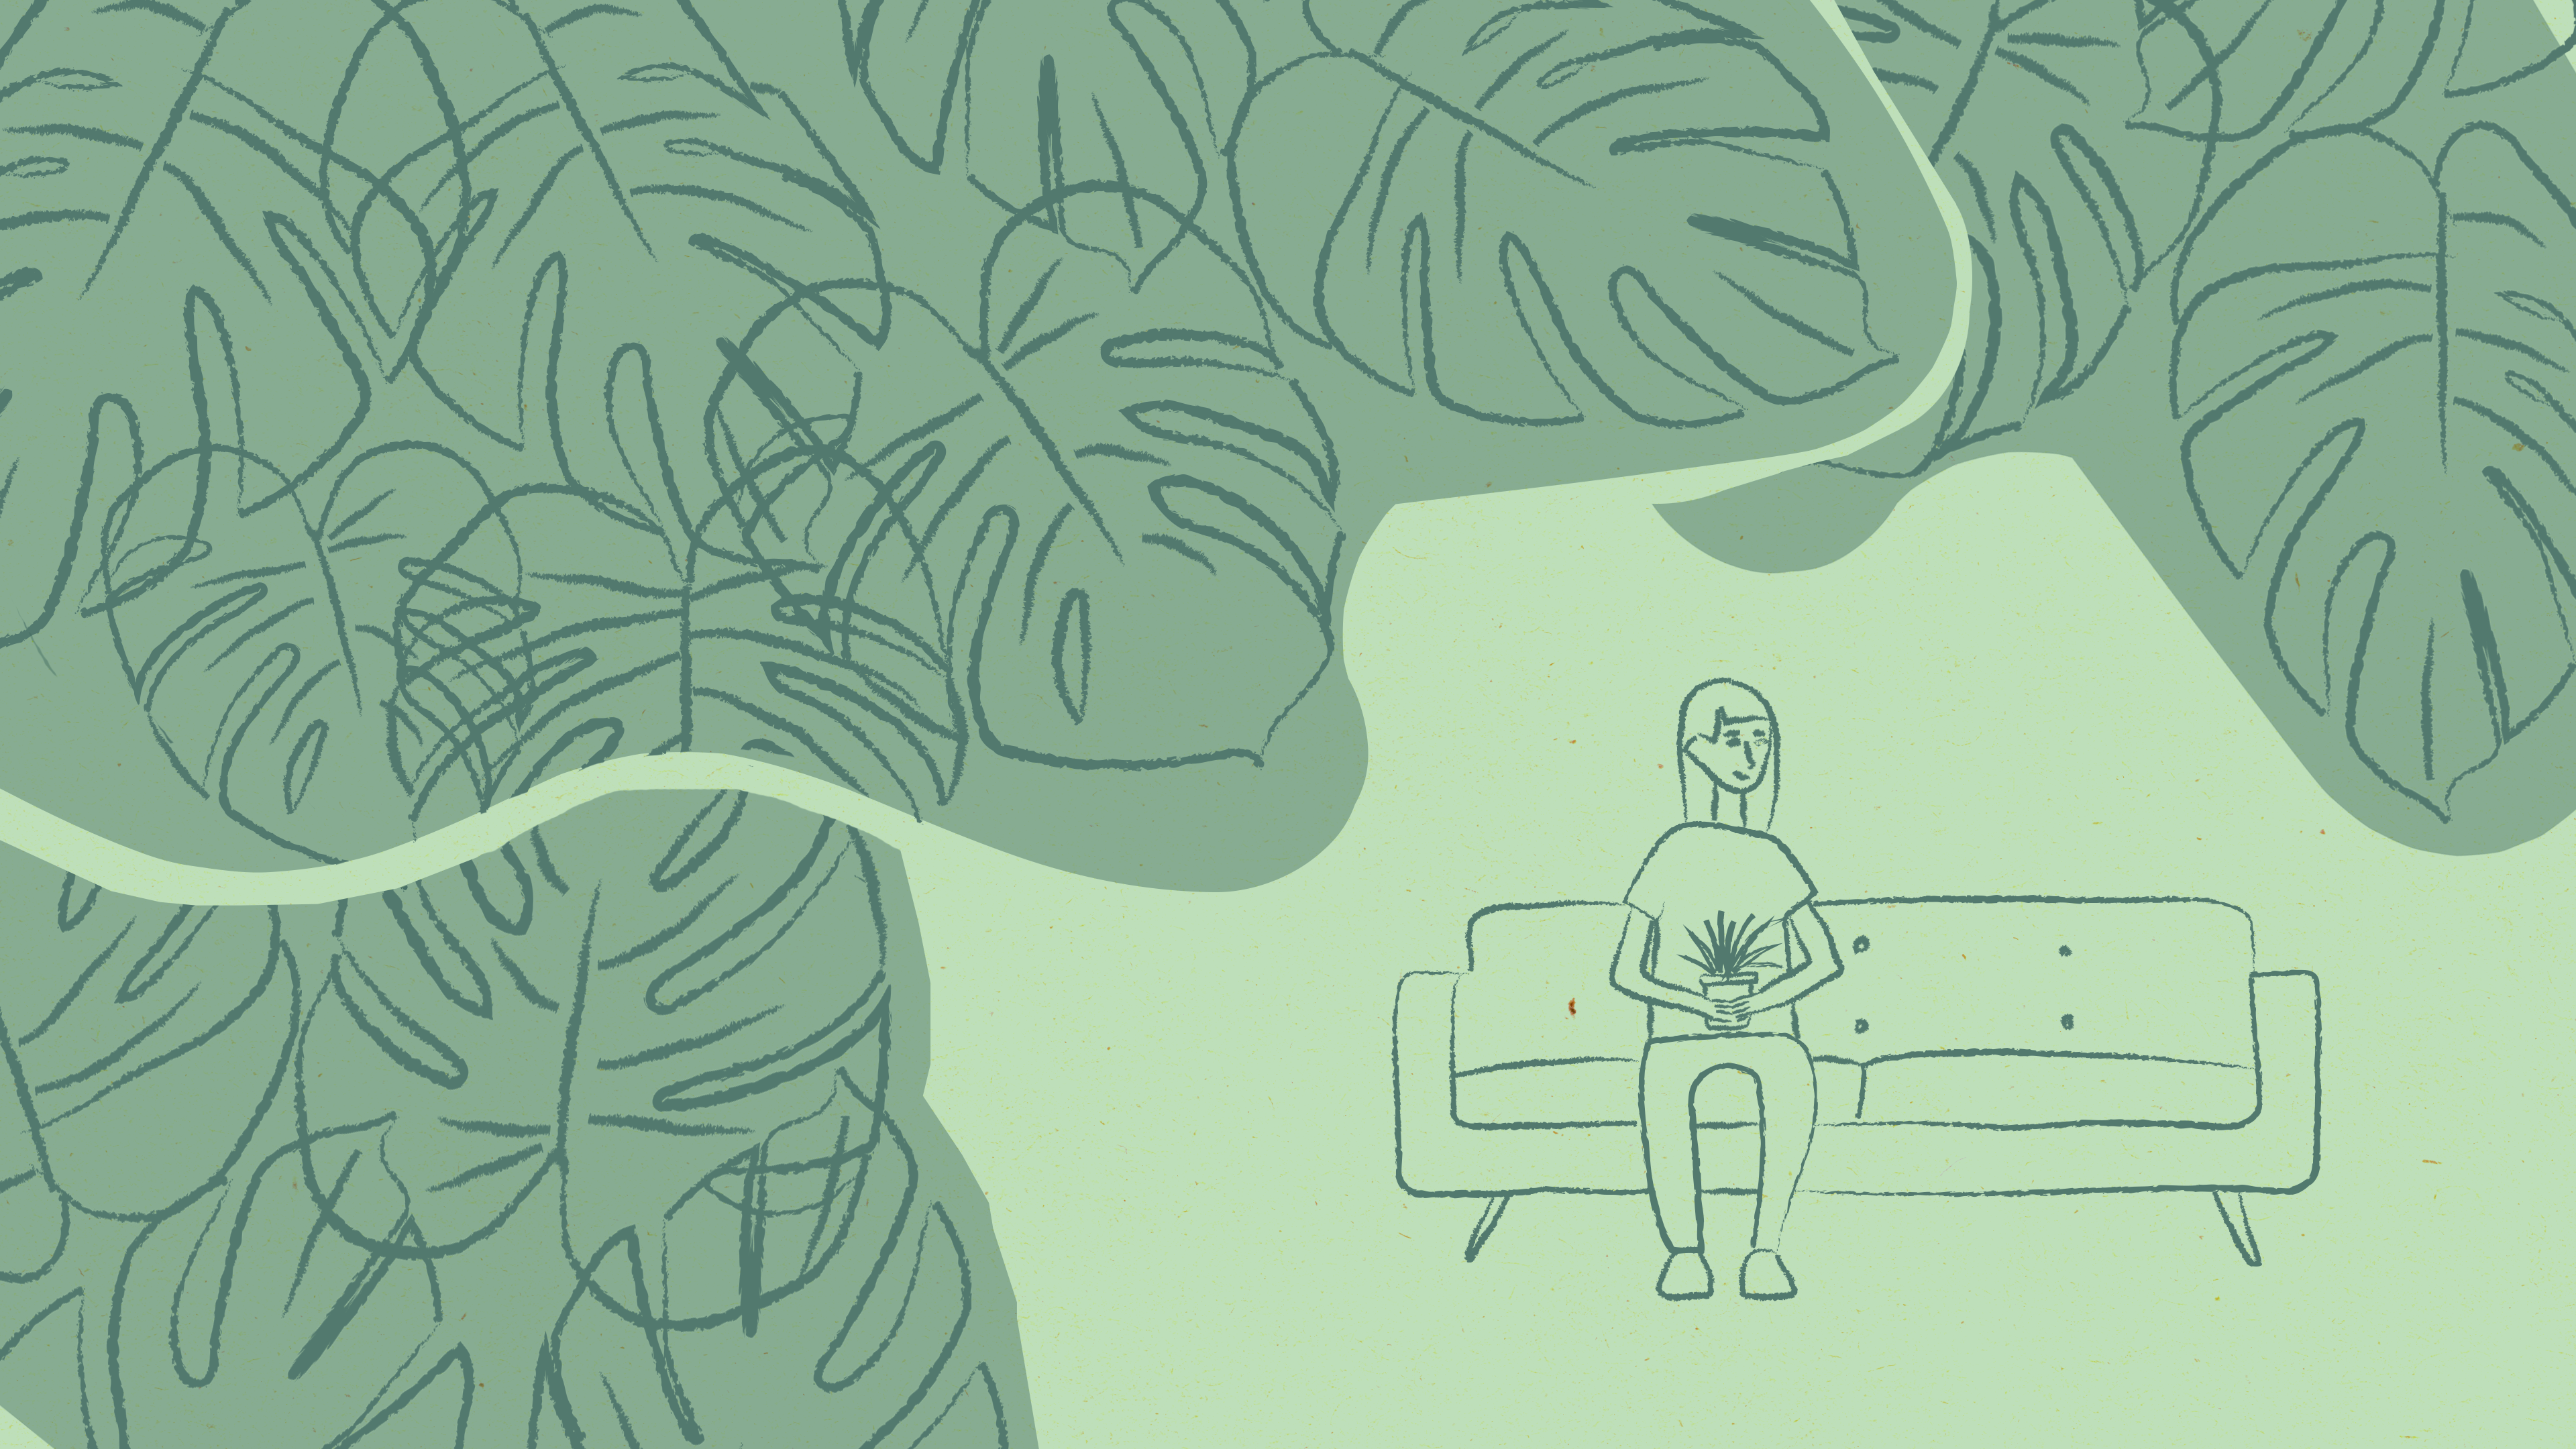 Illustration of a person clutching a small plant on a couch. Surrounding her are massive, leafy greens.